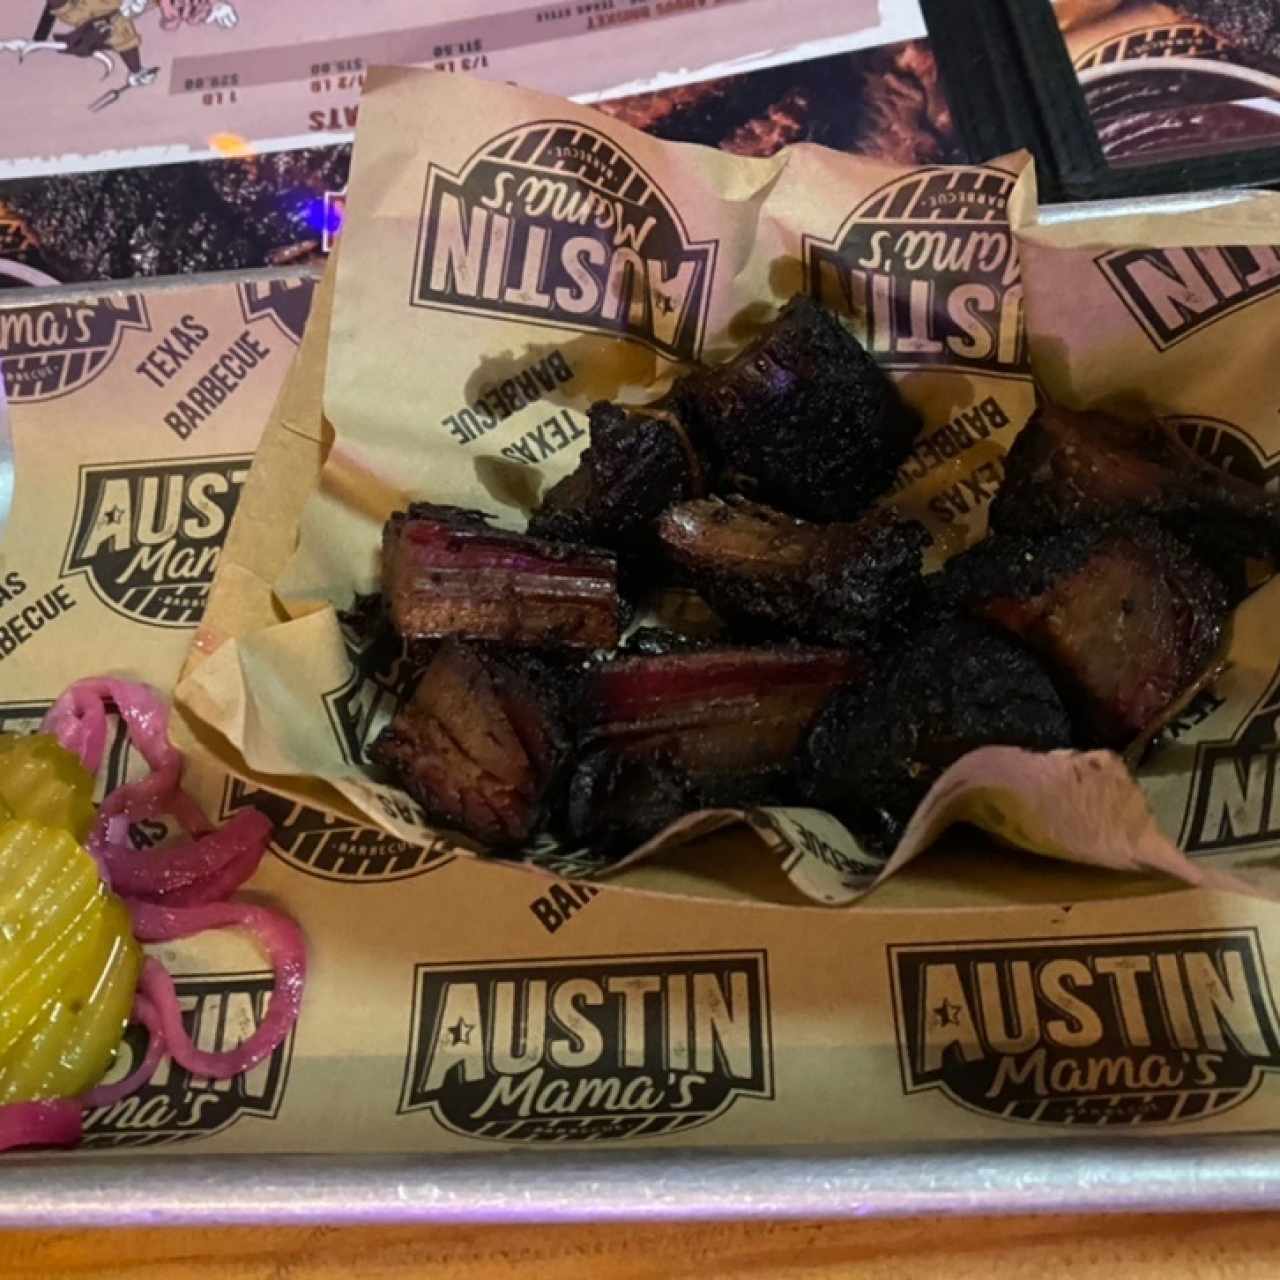 Smoked Meats - Burnt Ends